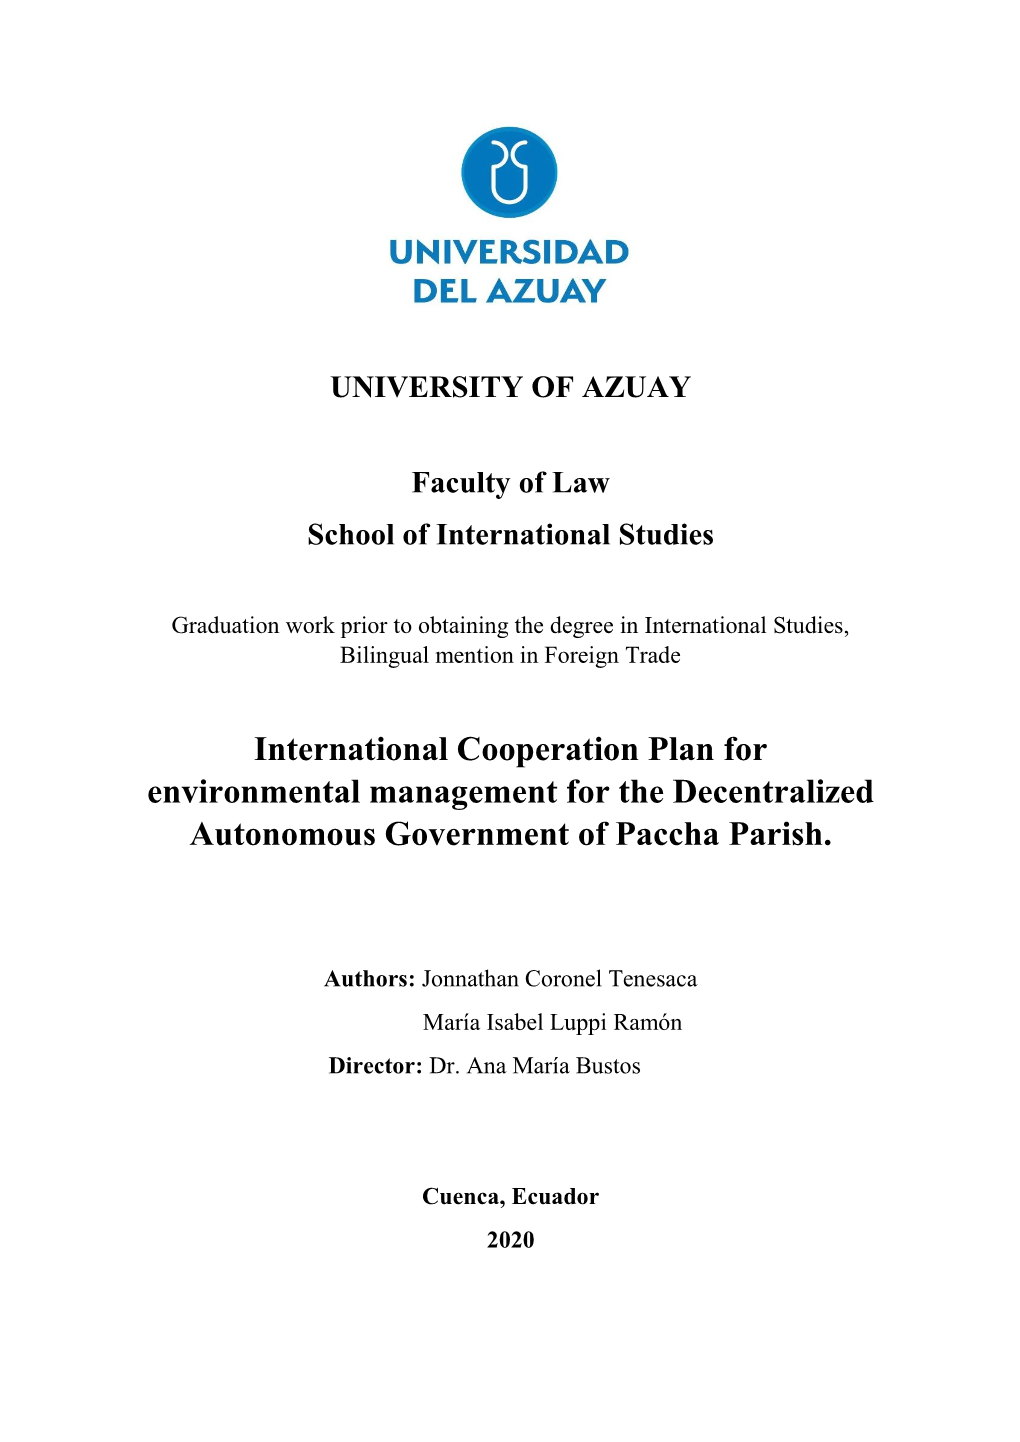 International Cooperation Plan for Environmental Management for the Decentralized Autonomous Government of Paccha Parish